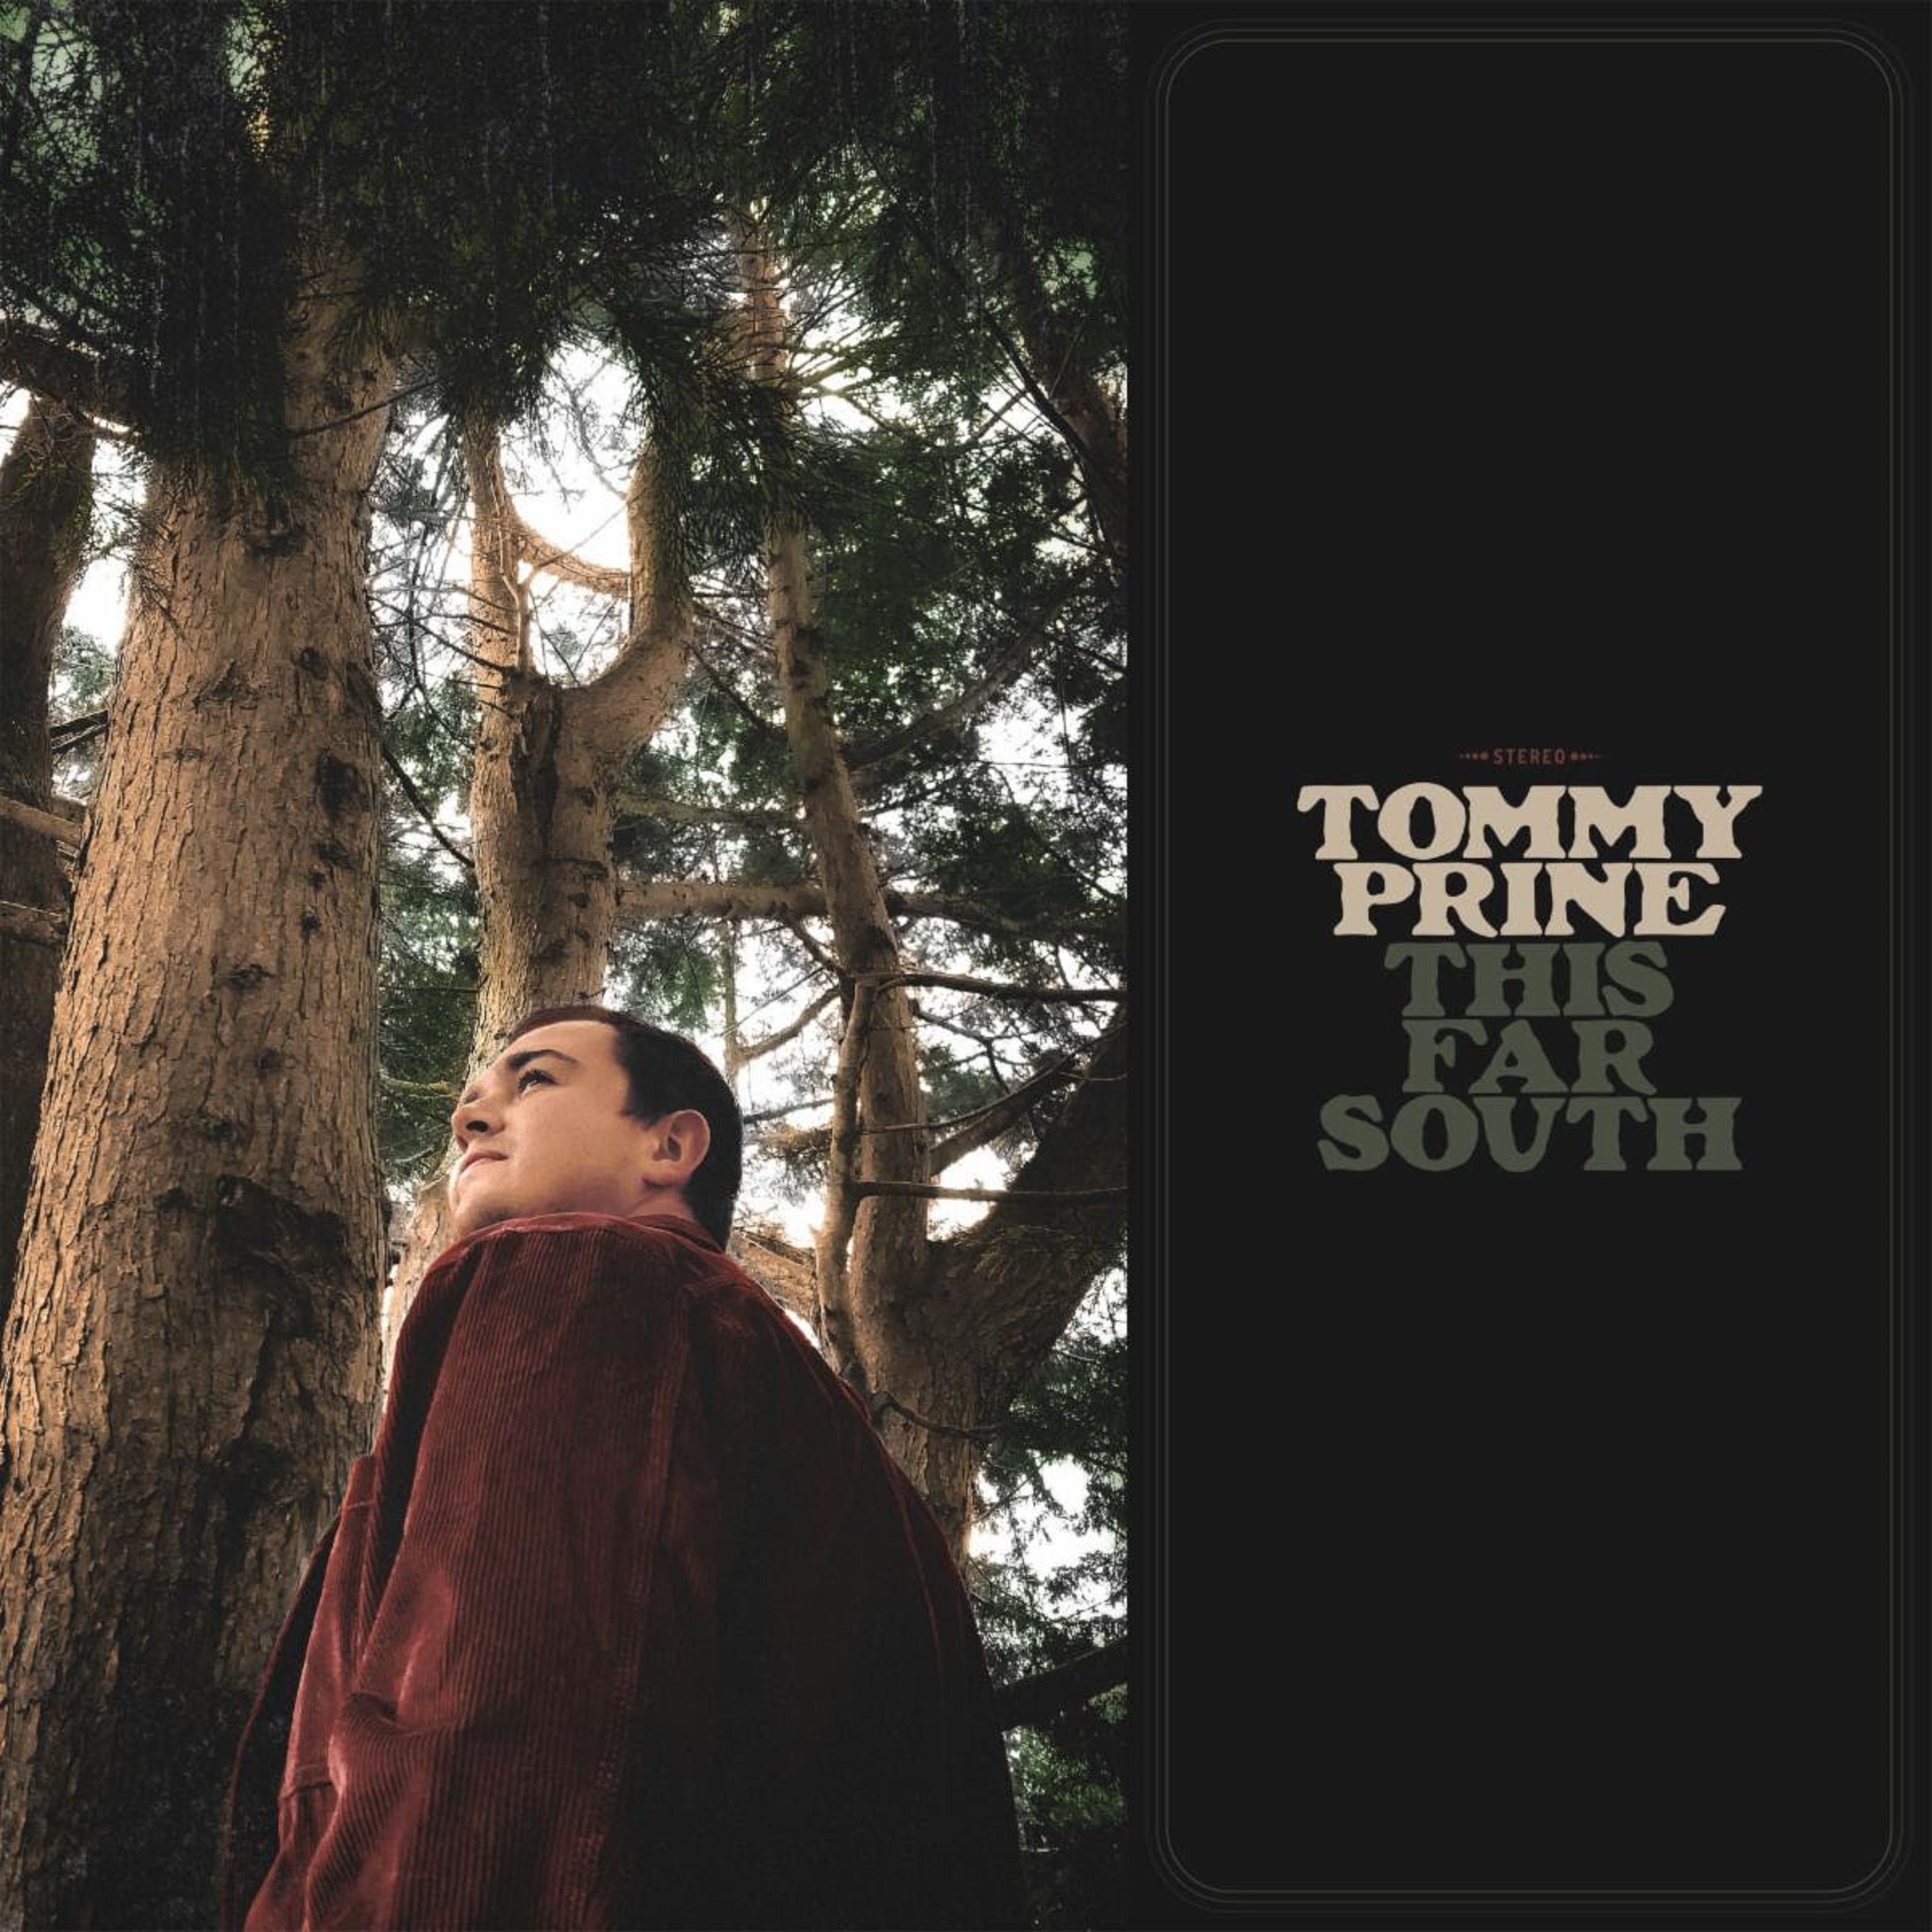 Tommy Prine’s Debut Album This Far South Due Out June 23rd